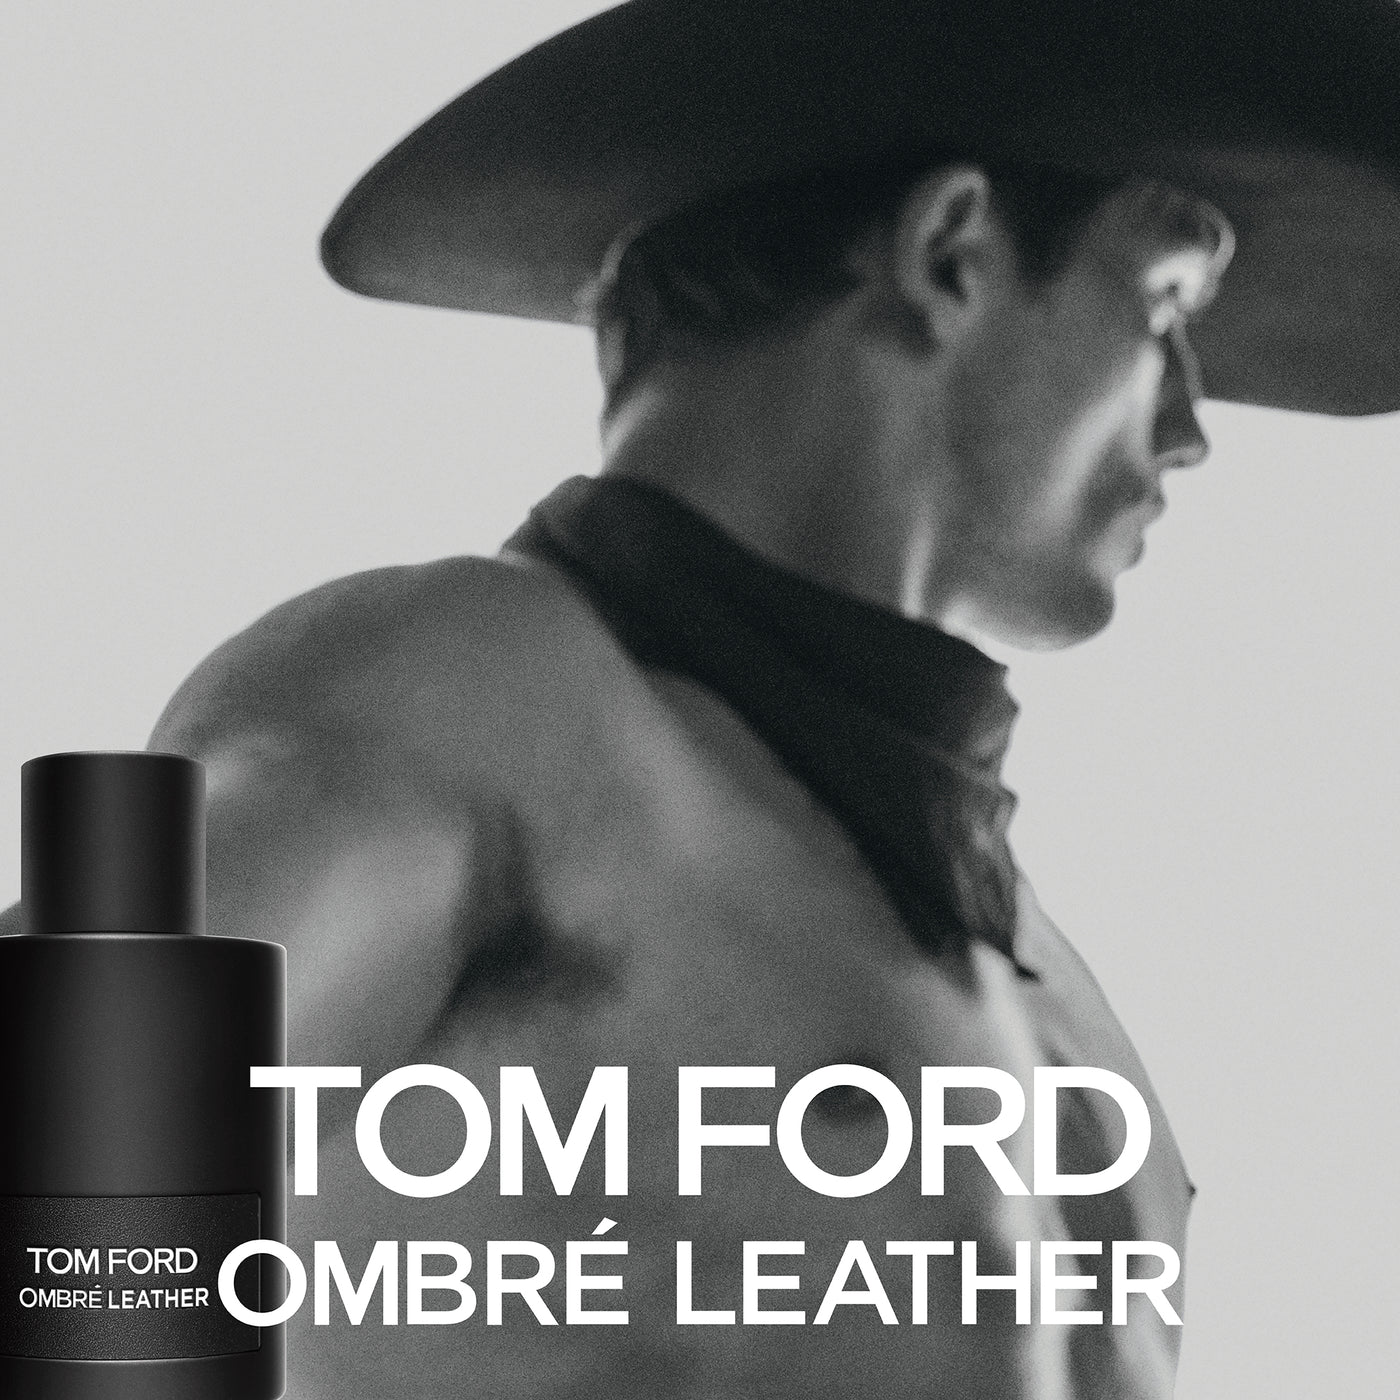 Buy Tom Ford Ombre Leather Eau Da Pafrum 